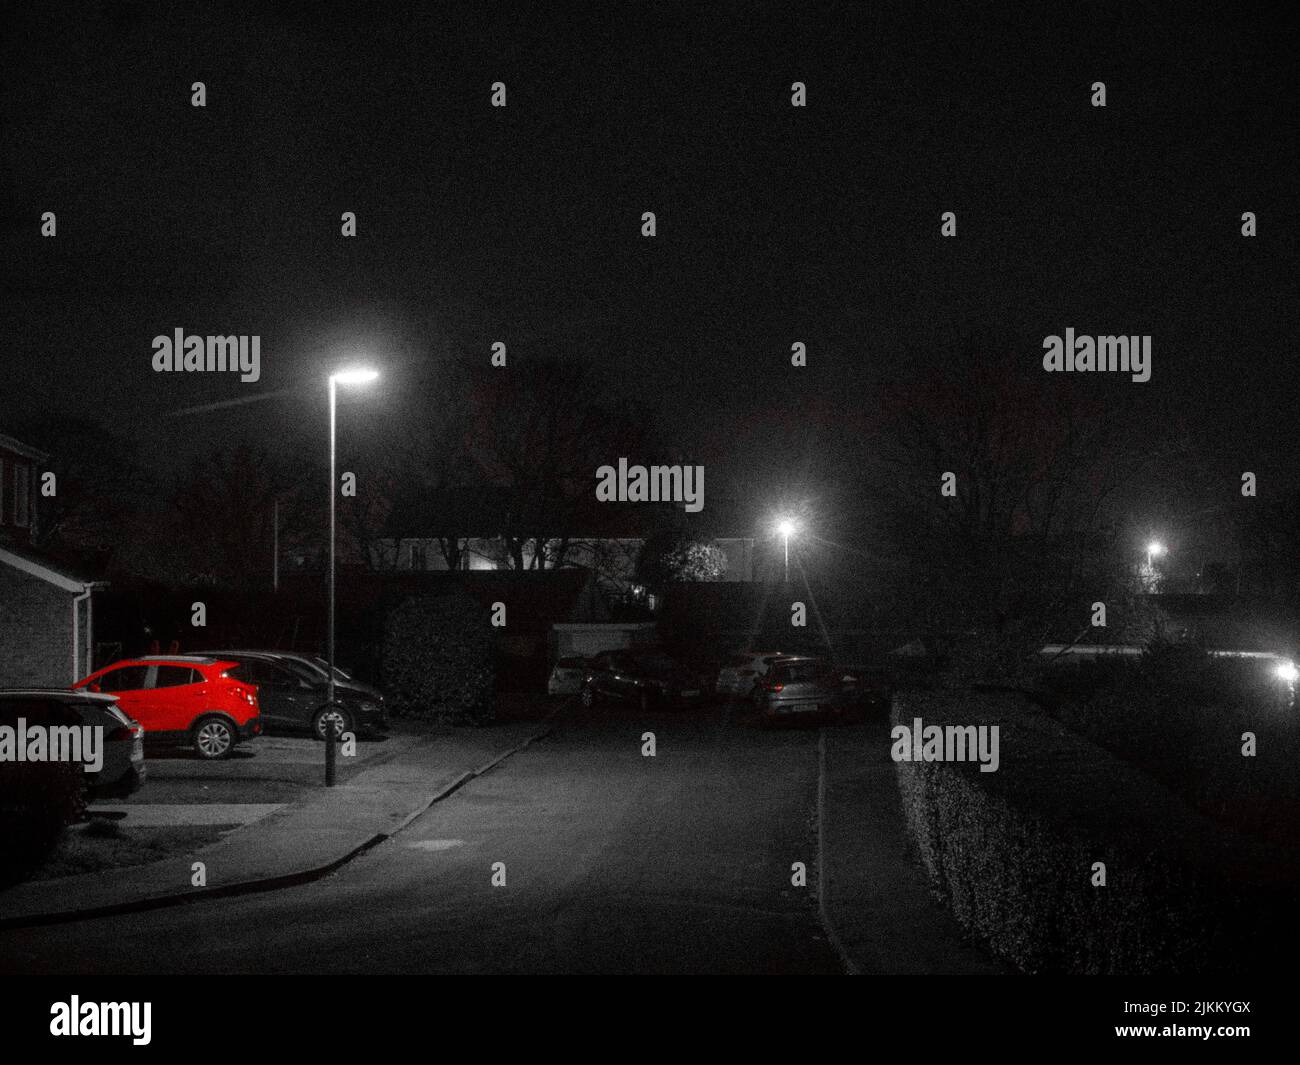 A grayscale view of a neighborhood with a single vibrant red parked car Stock Photo